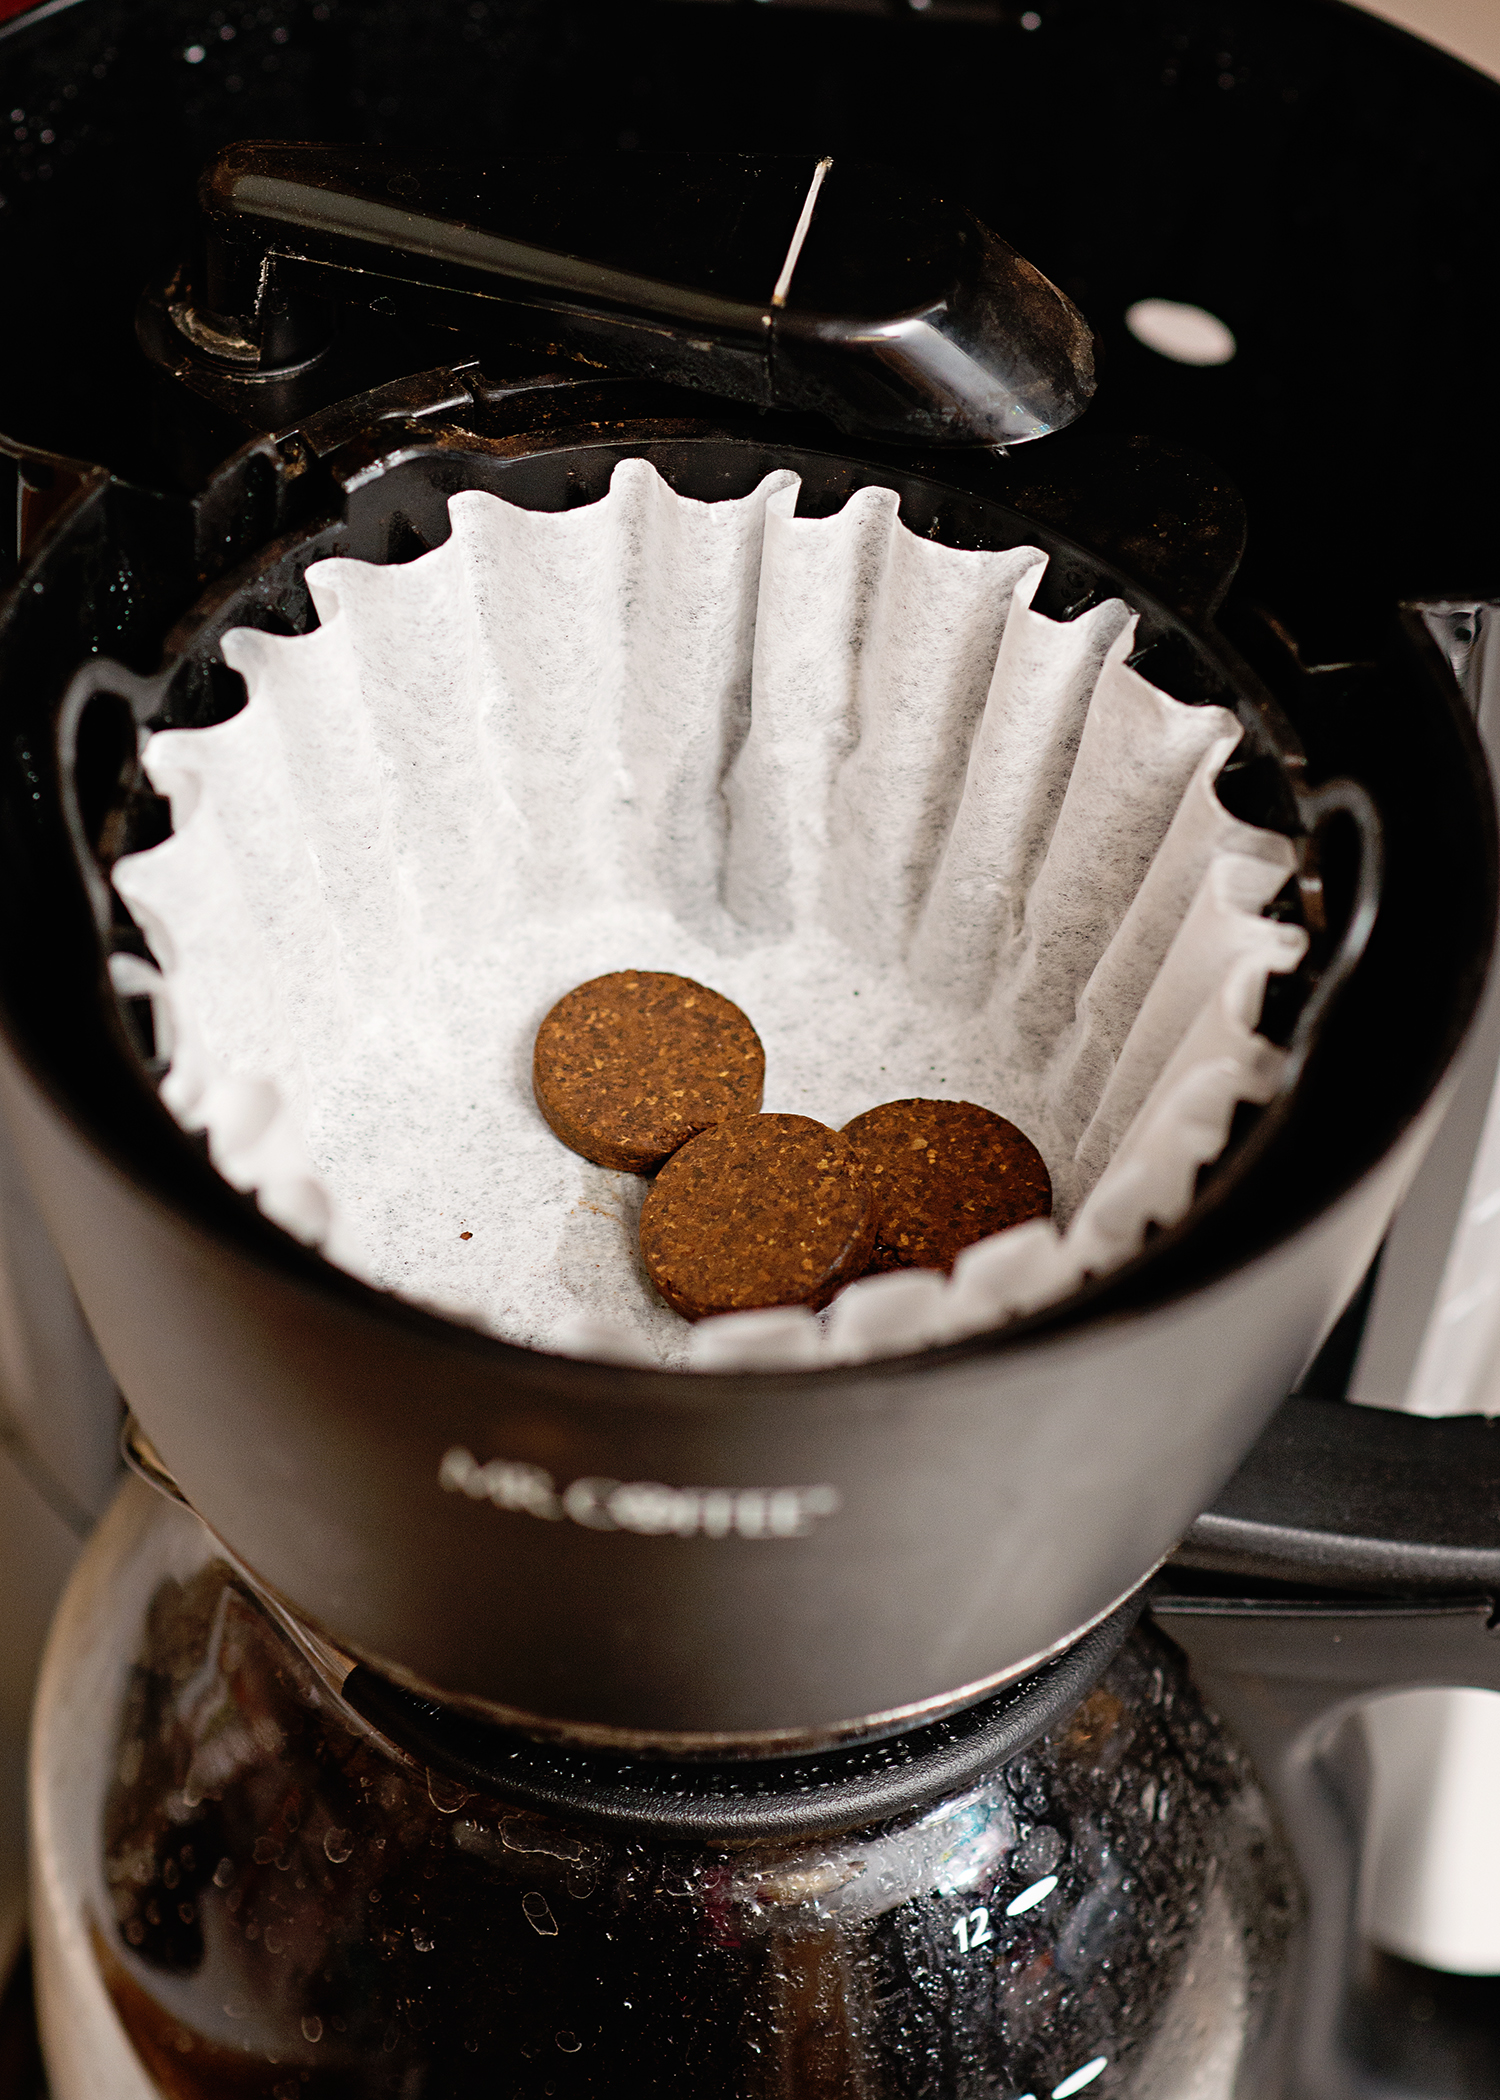 Ready for a Smooth Morning? Making Coffee Just Got Easier!